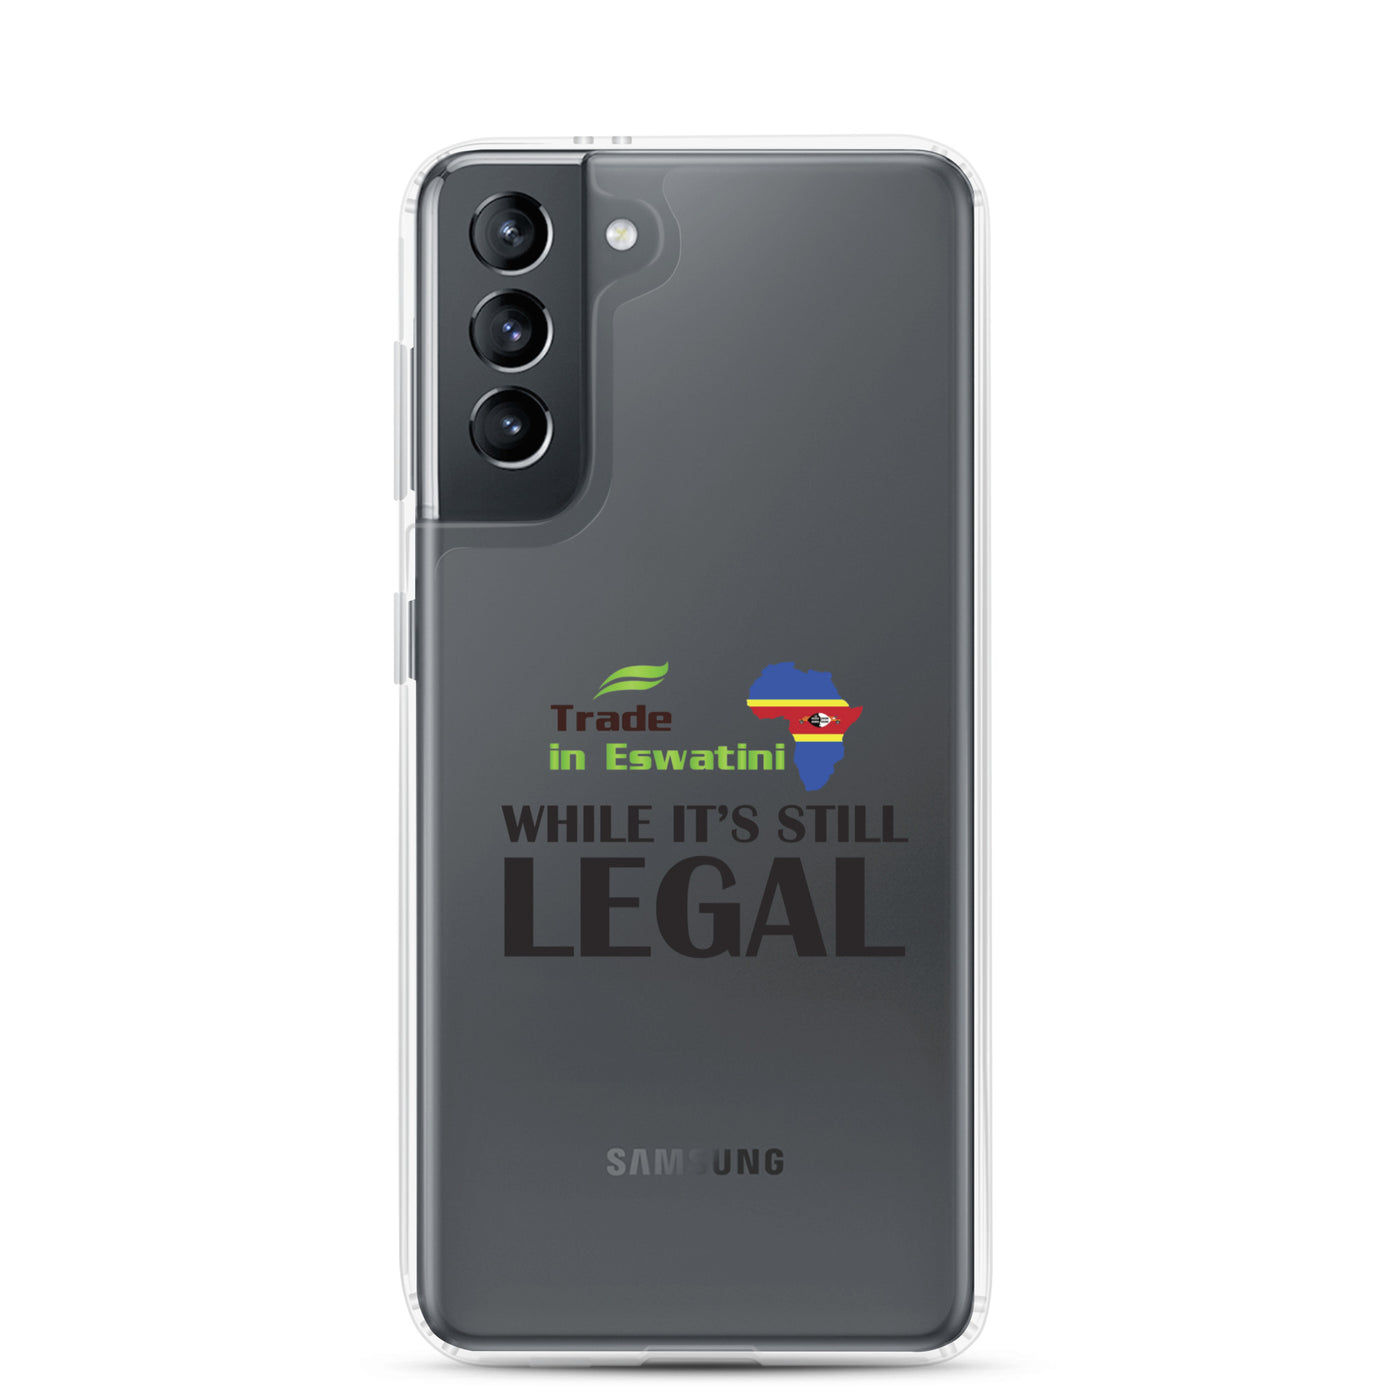 While It's Still Legal - Trade In Eswatini Samsung Case